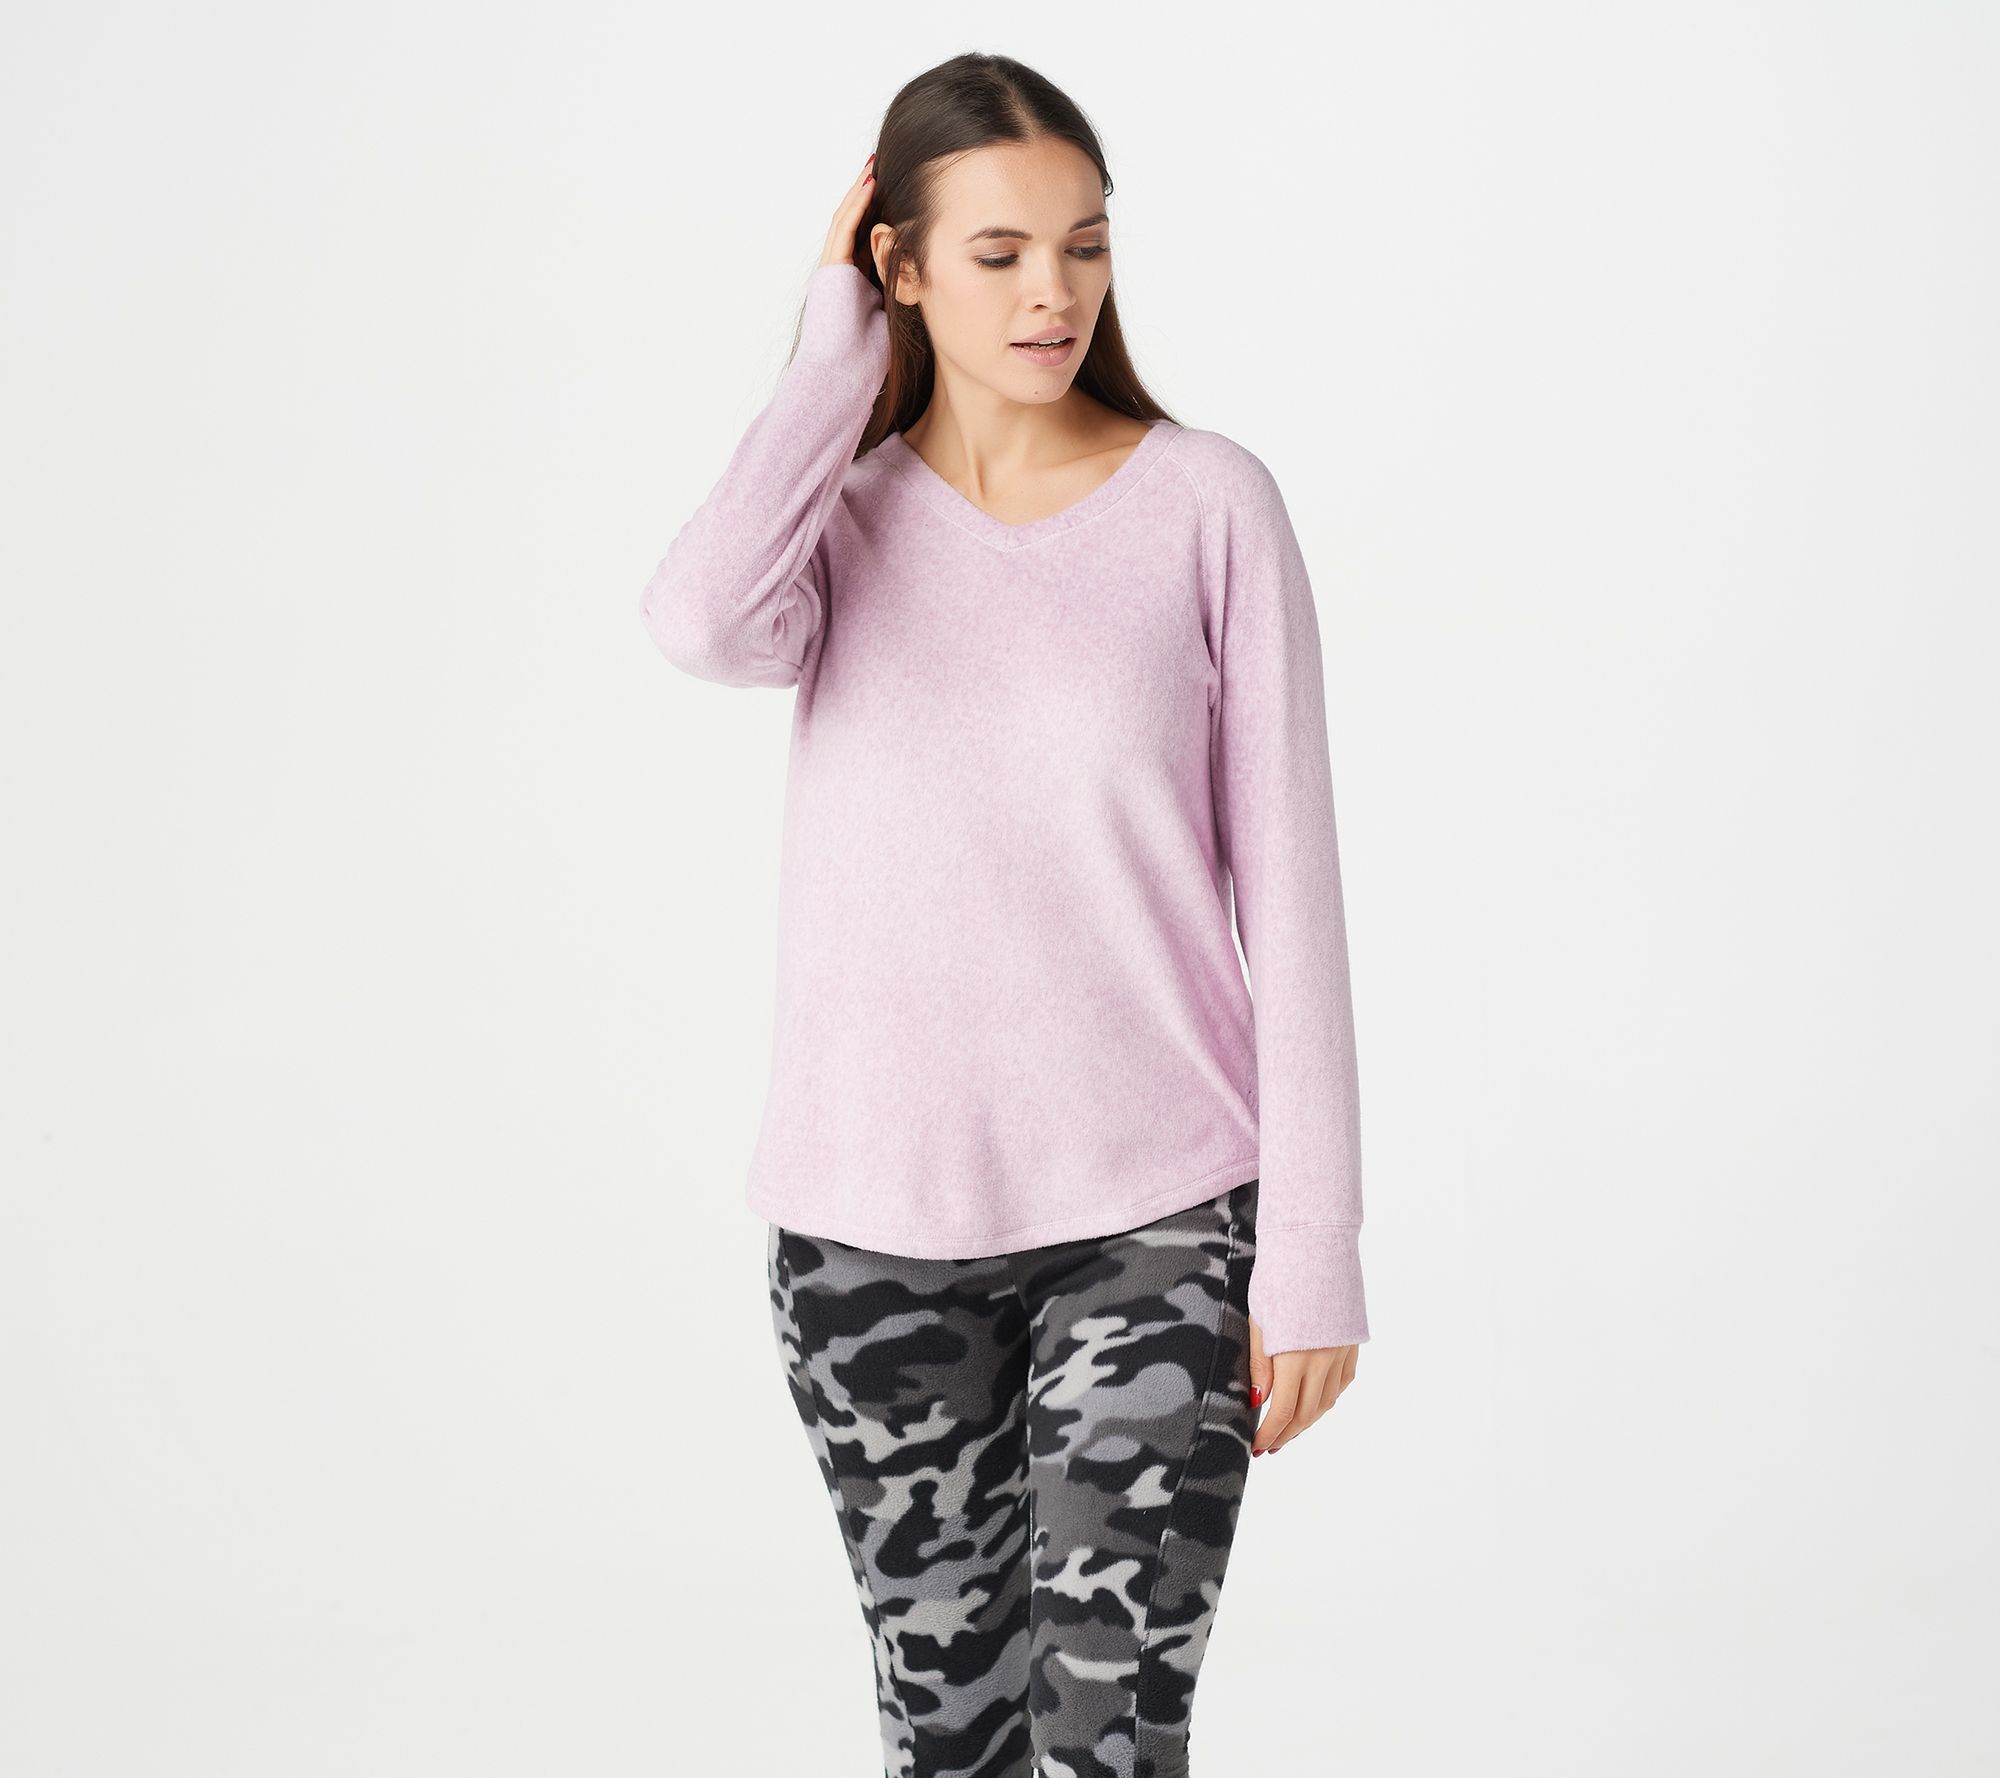 Cuddl Duds Women's Fleecewear with Stretch Crew Neck at  Women's  Clothing store